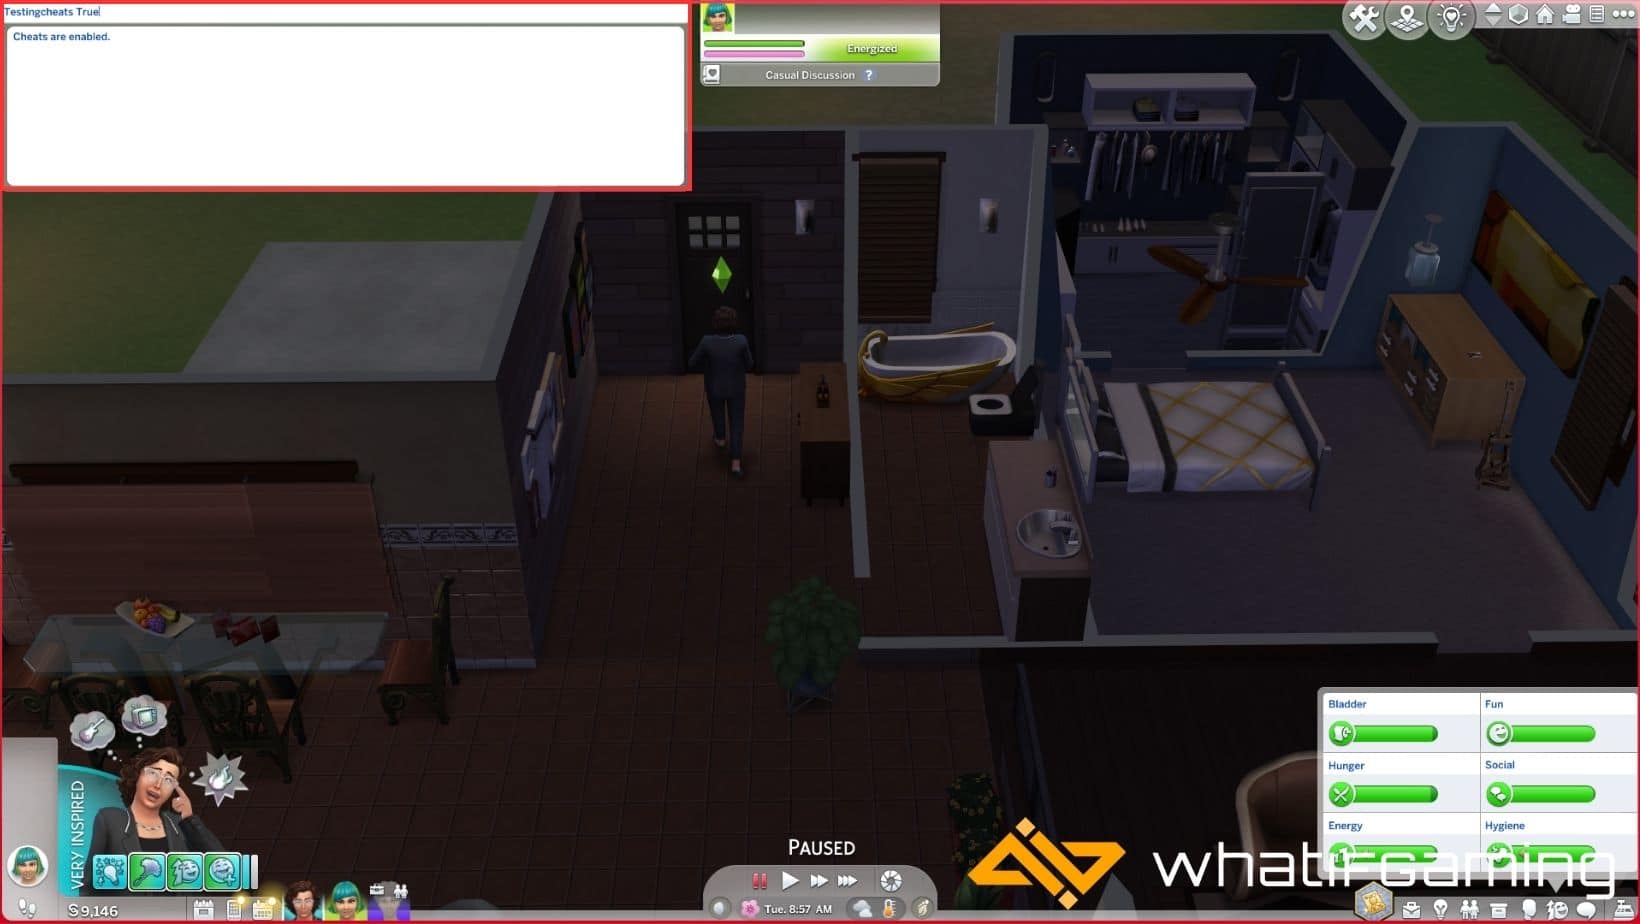 The Sims 4 University Cheats: Master College Life - WhatIfGaming